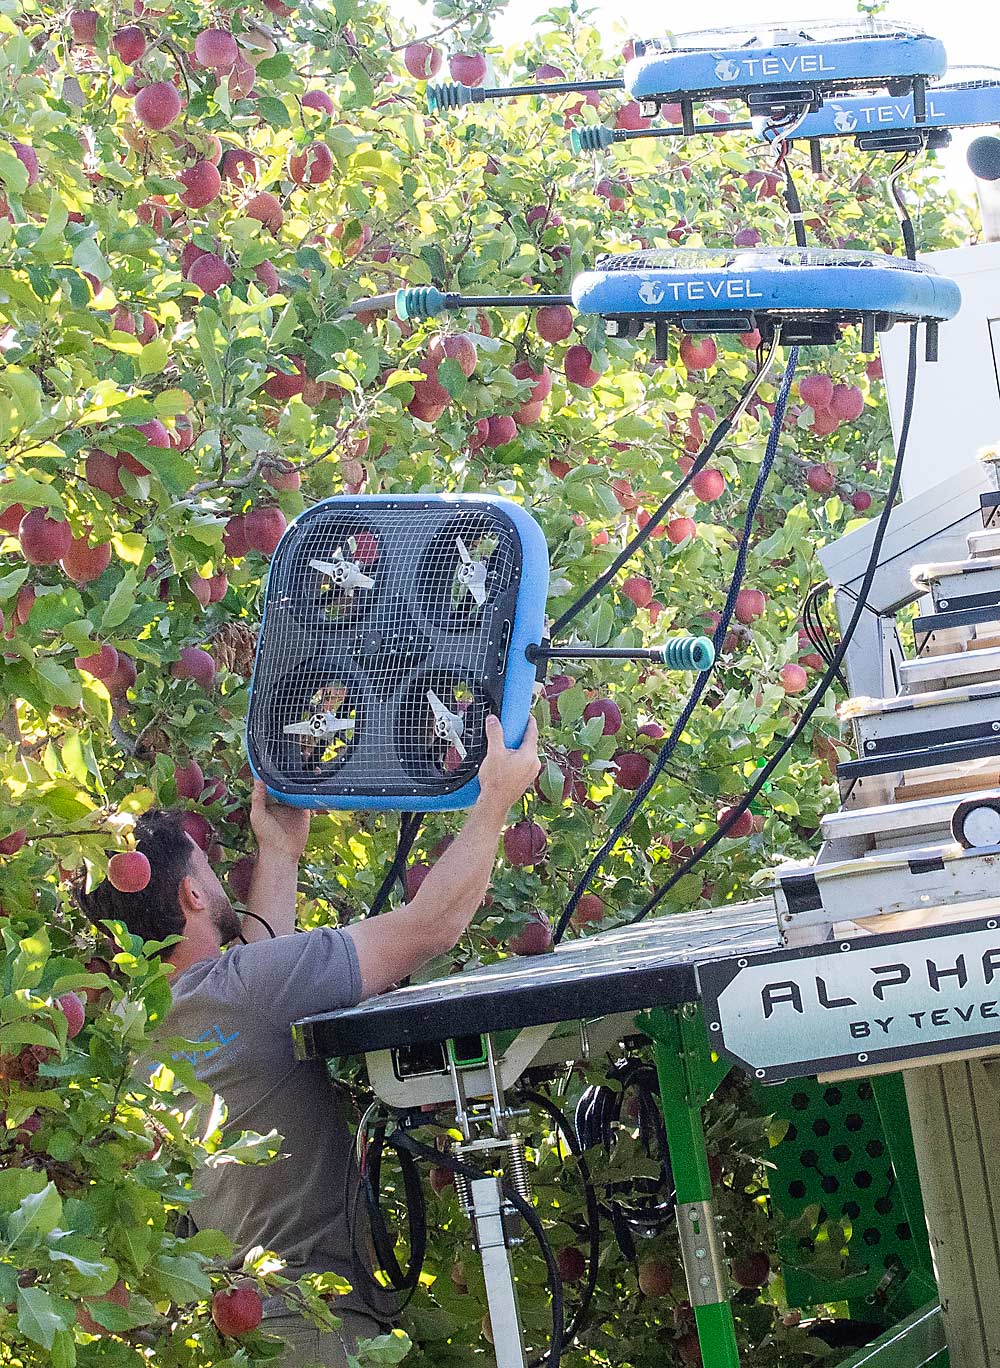 Tevel operator Meir Greiver snatches an errant drone from the air and reorients it with the platform so it can resume picking, a glitch the company expects to resolve by the time it releases the robot commercially. (TJ Mullinax/Good Fruit Grower)